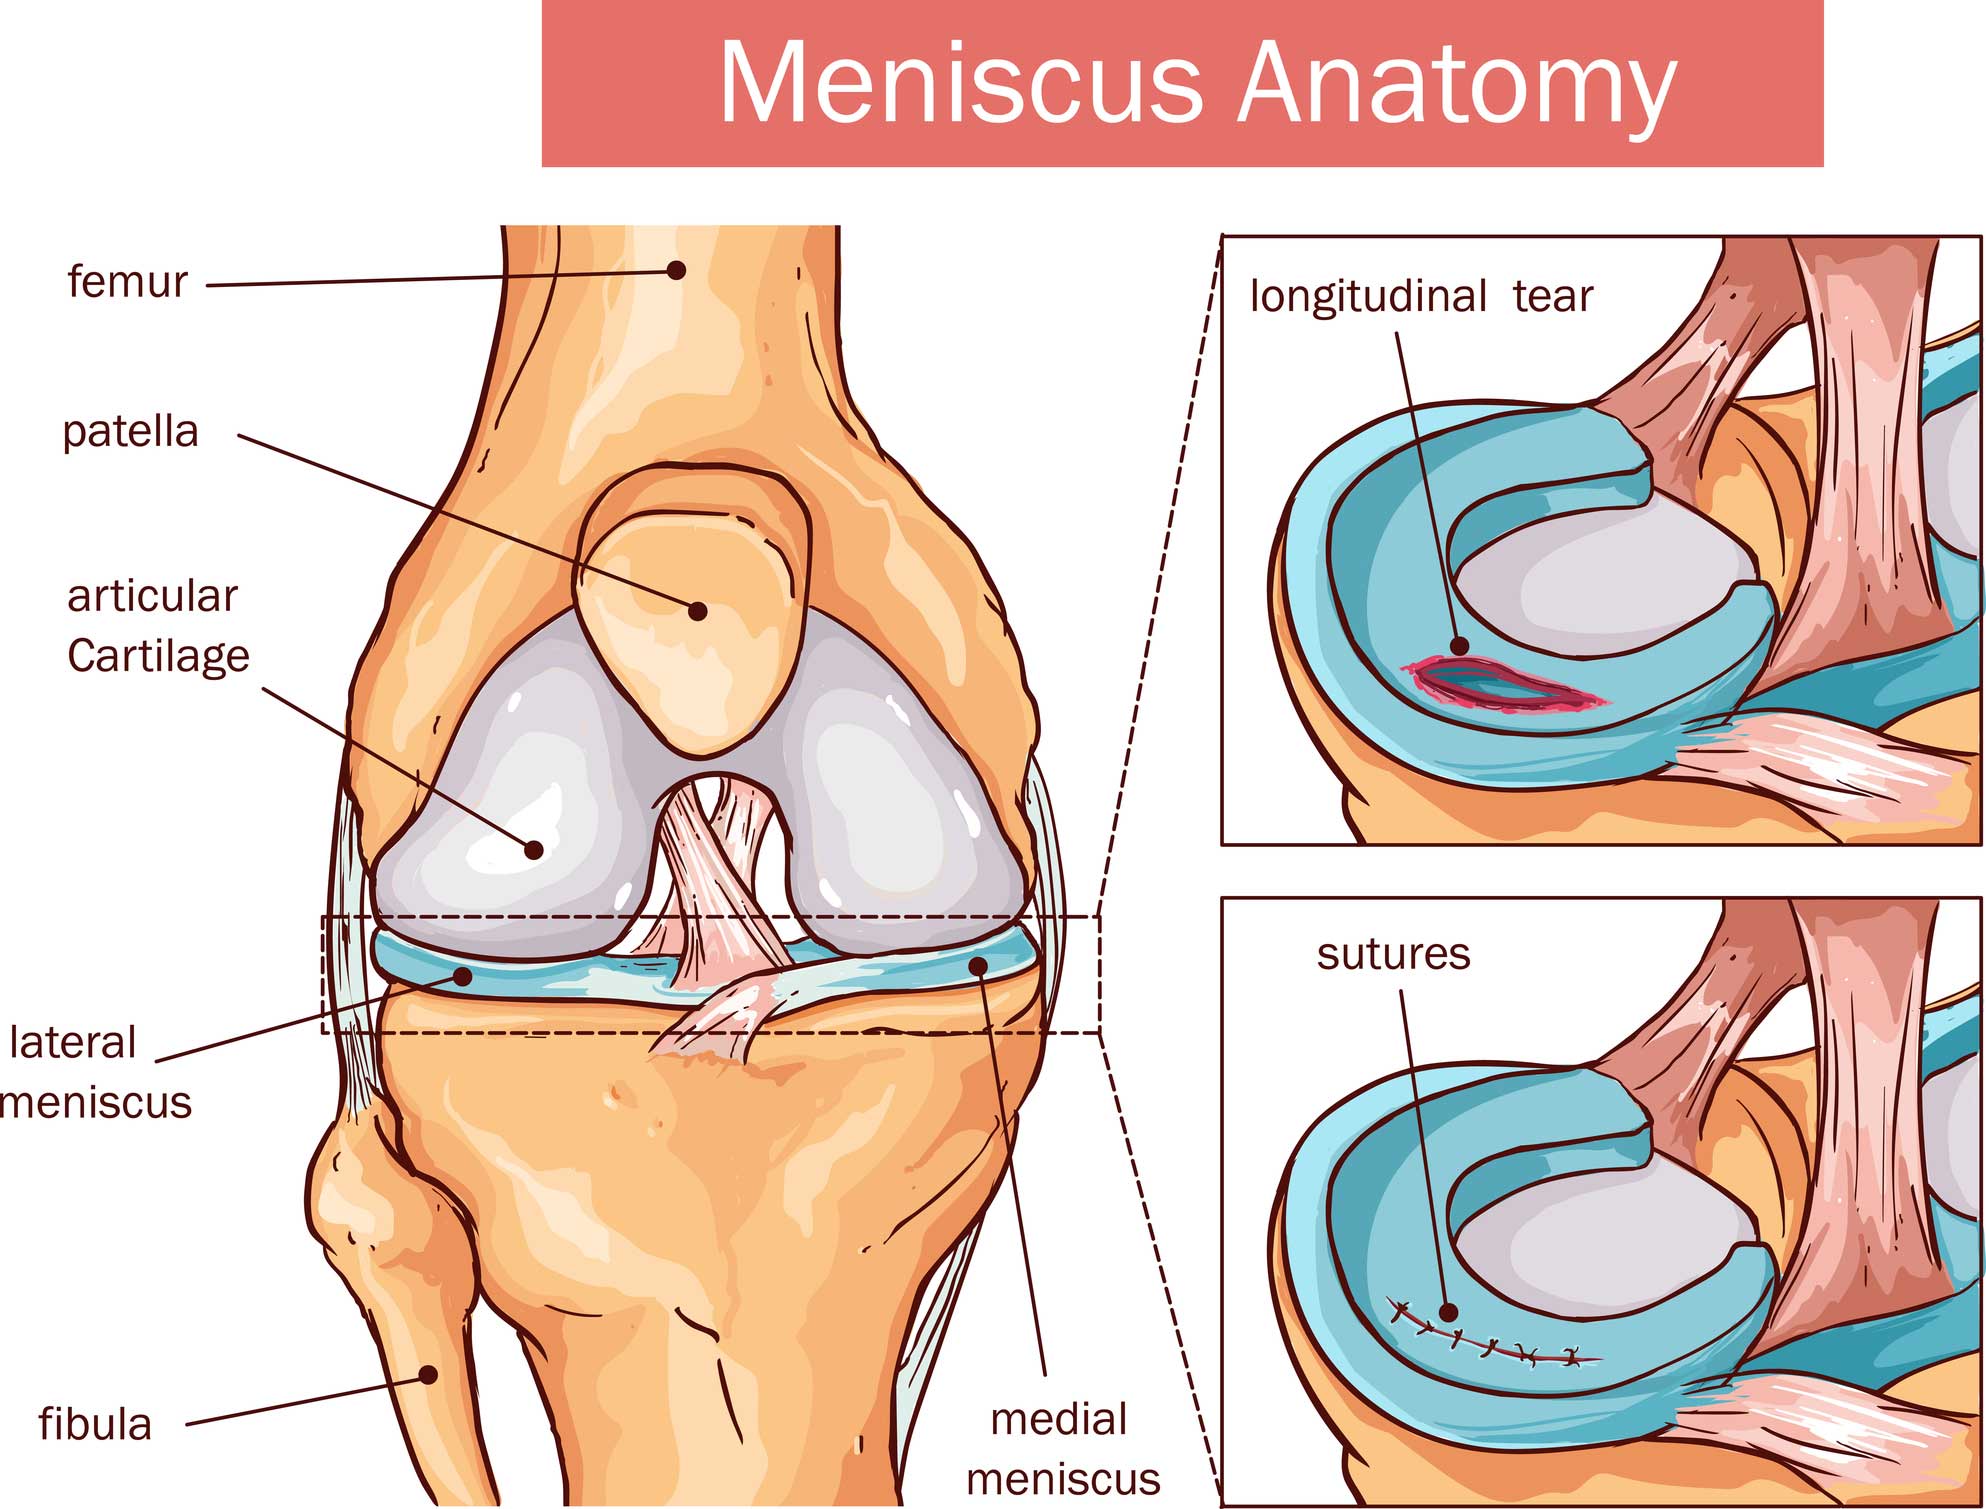 Nfl Week 14 Injury Report How A Torn Meniscus Can Change Your Life - Health News Hub